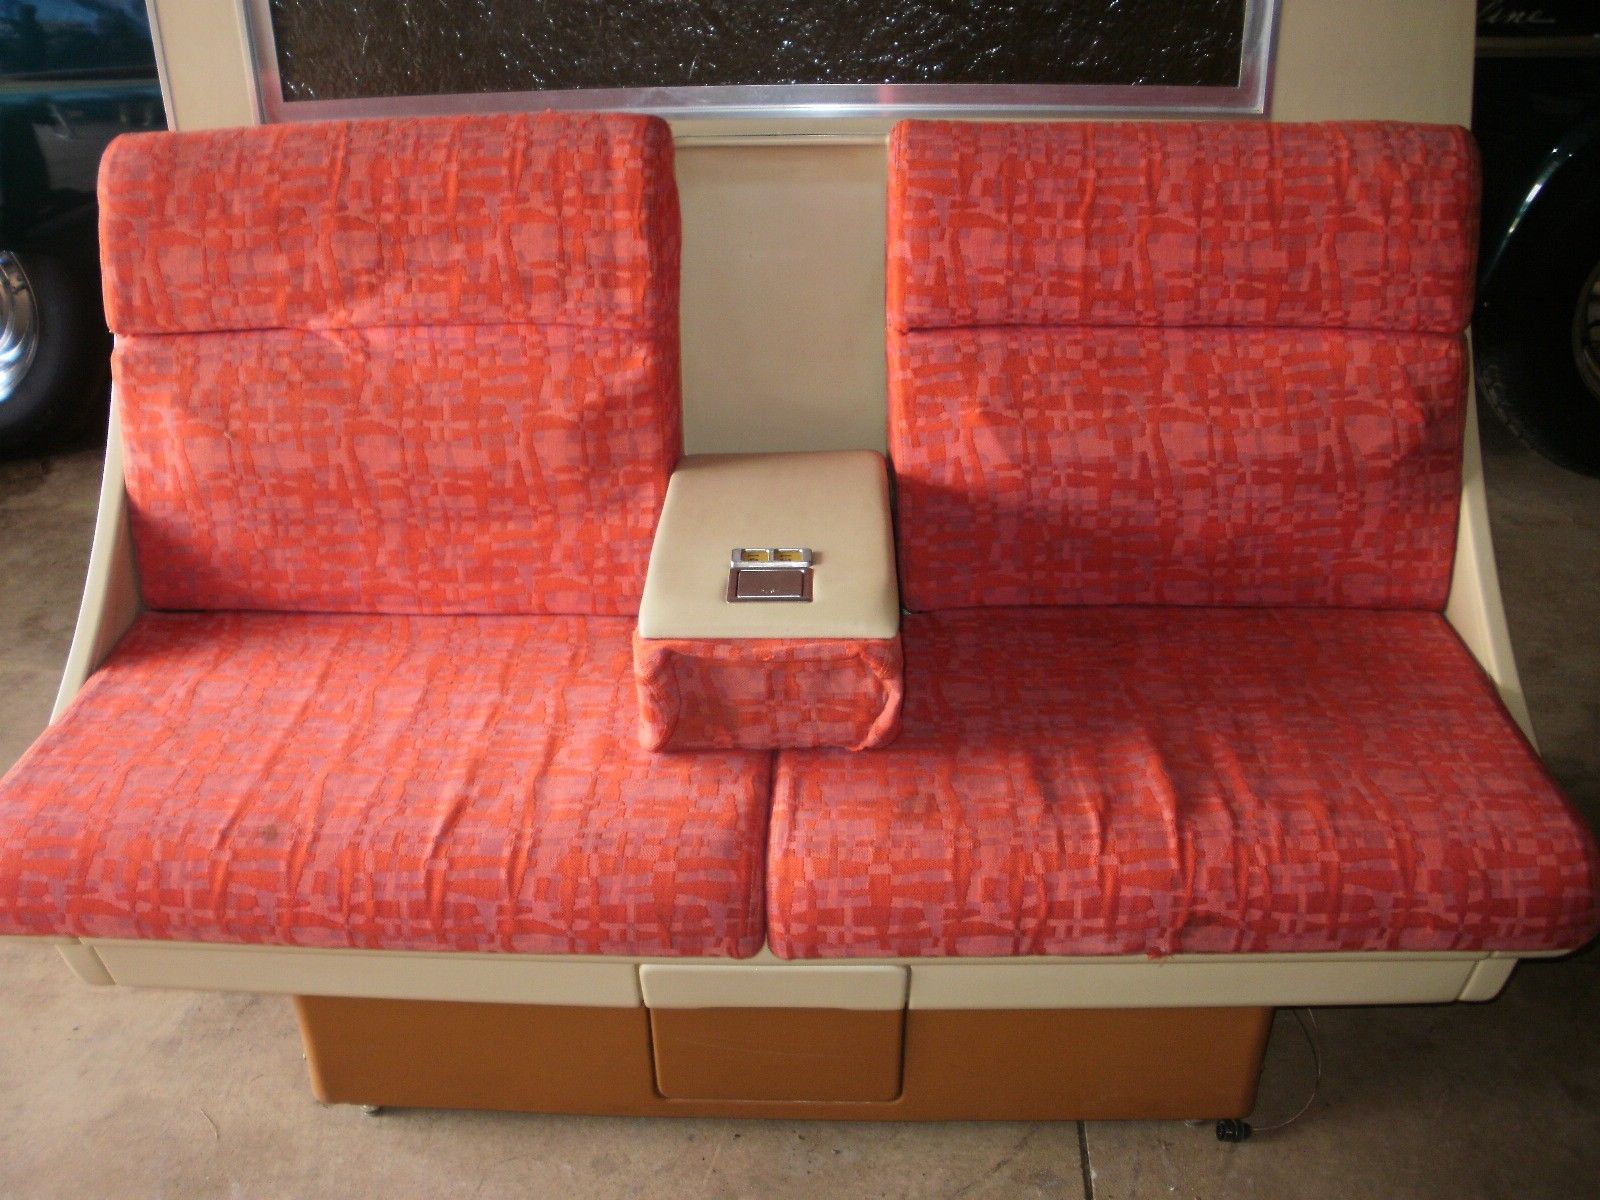 Trump Supporters Claim First Class Armrests Couldn’t Move In The 1980s, Which Is A Lie